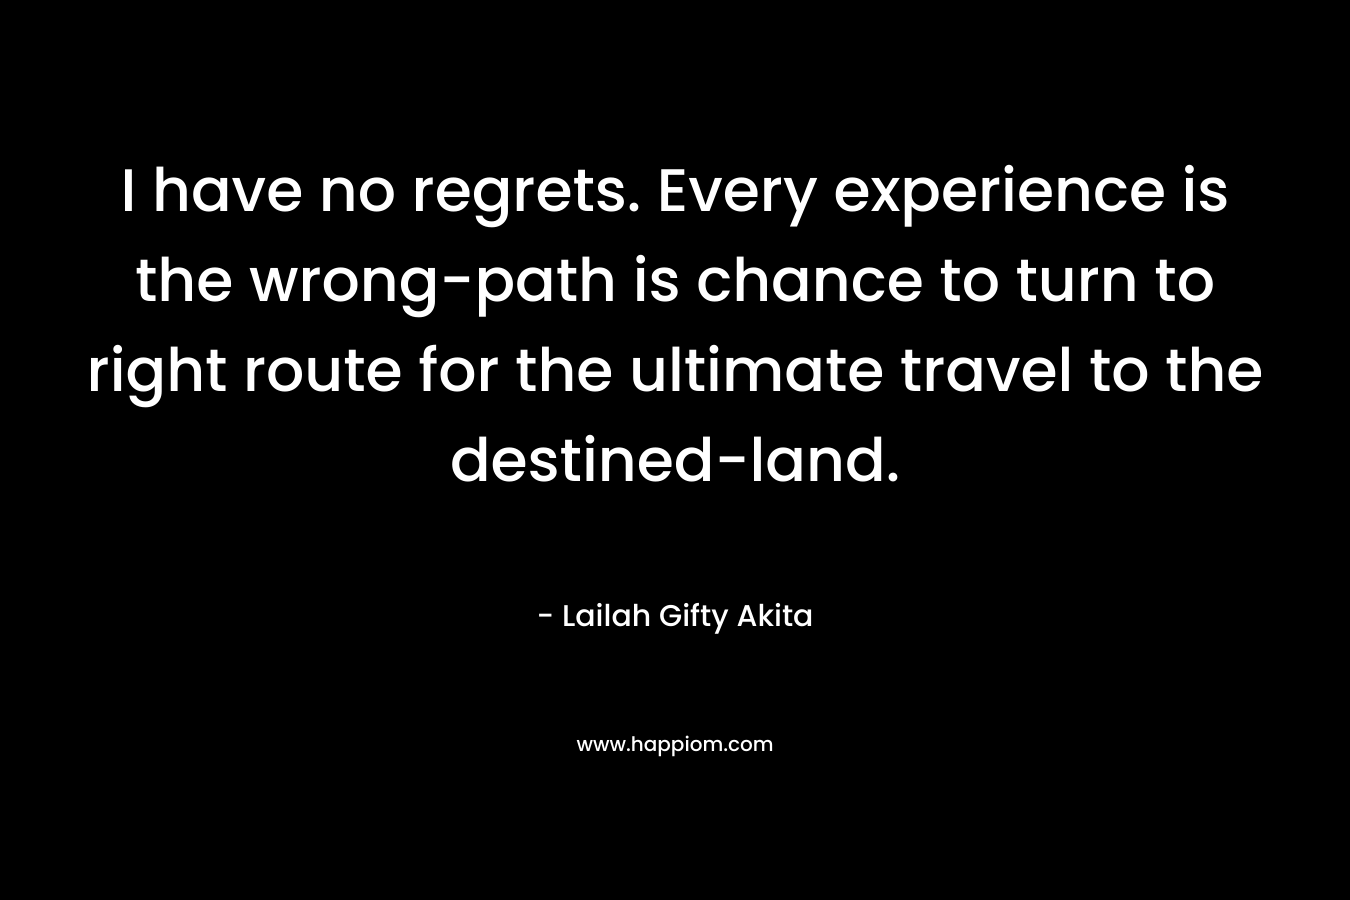 I have no regrets. Every experience is the wrong-path is chance to turn to right route for the ultimate travel to the destined-land. – Lailah Gifty Akita